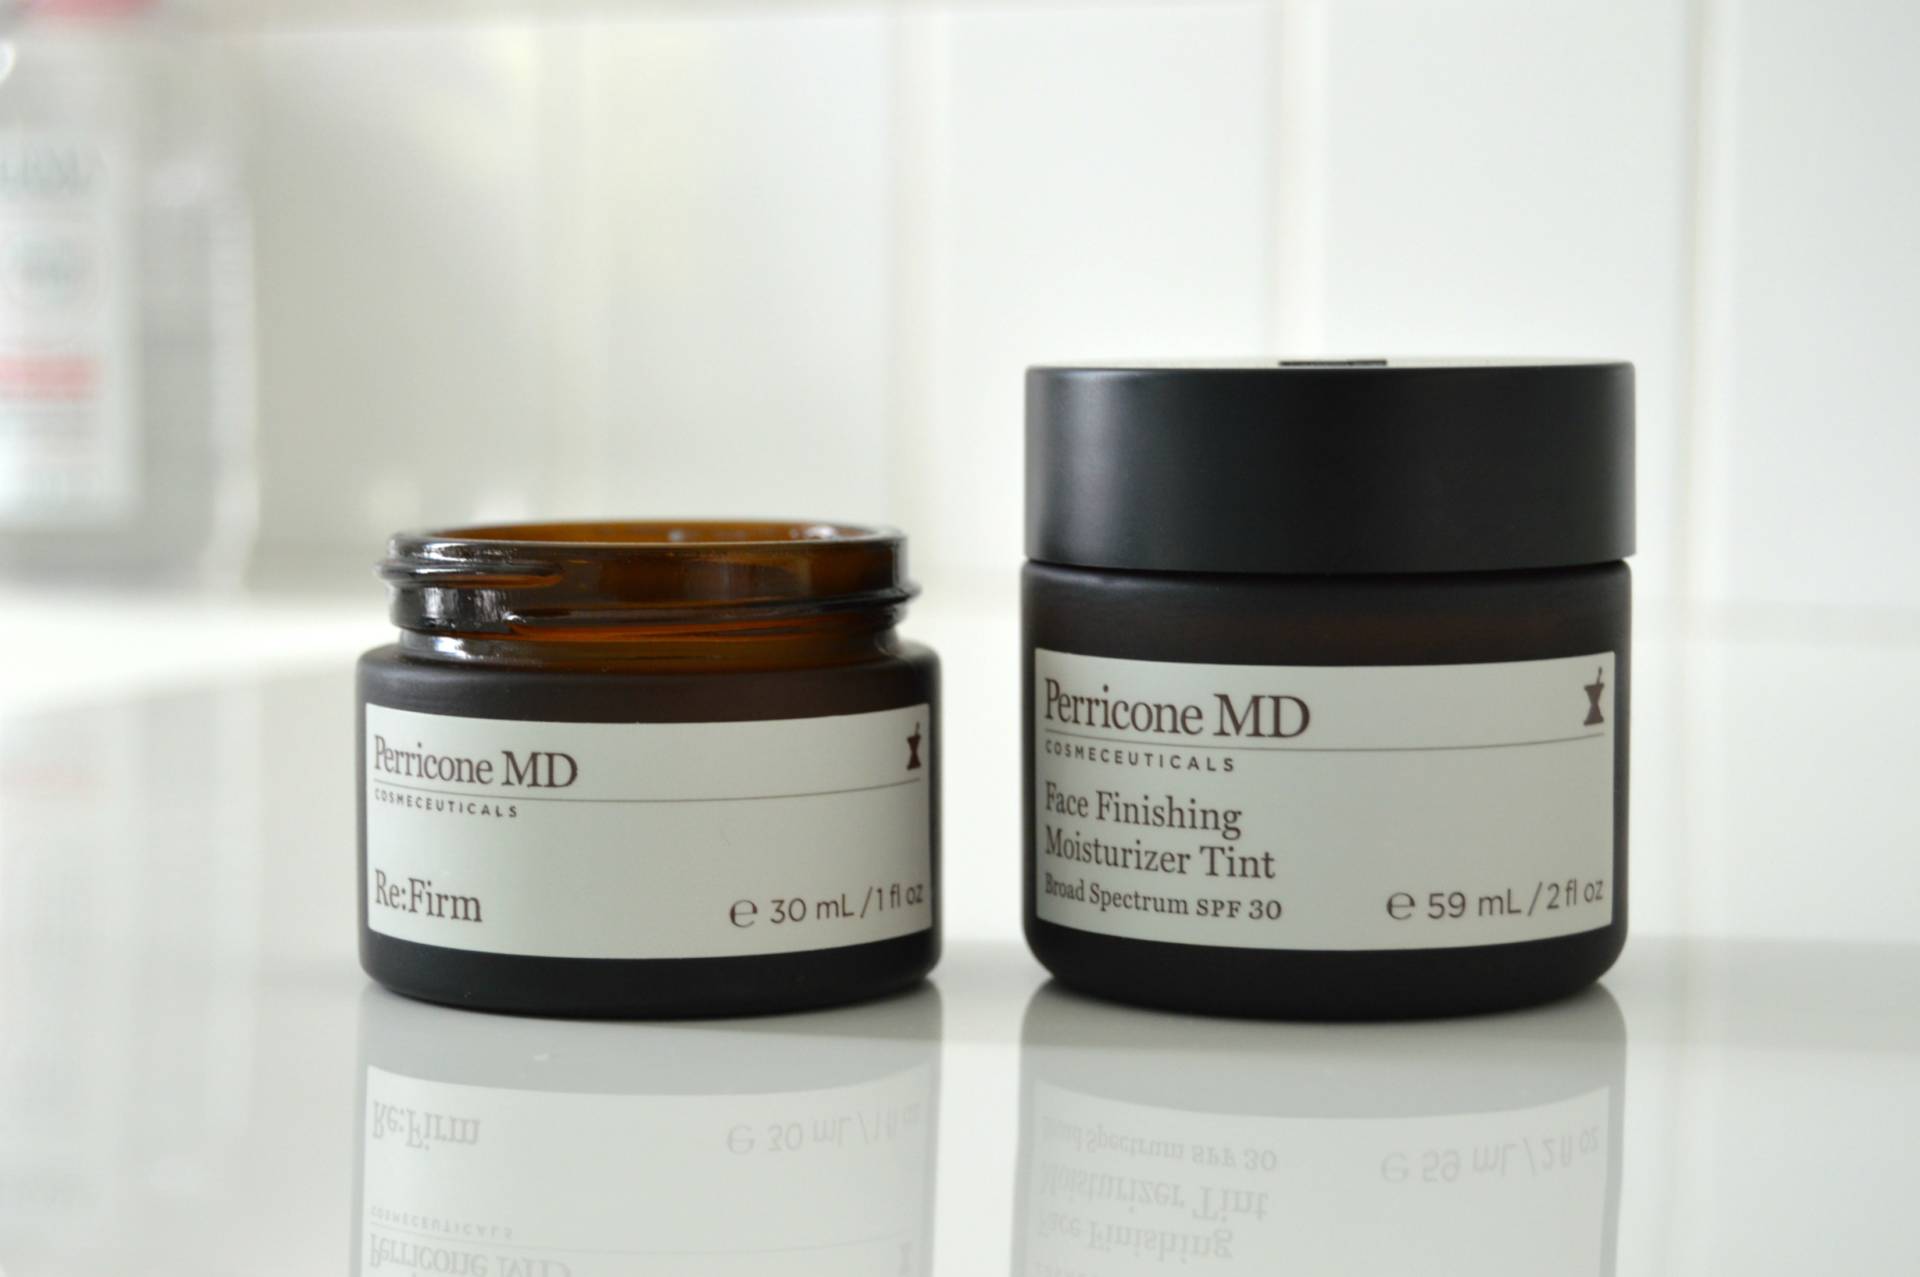 perricone re firm daytime treatment routine review inhautepursuit